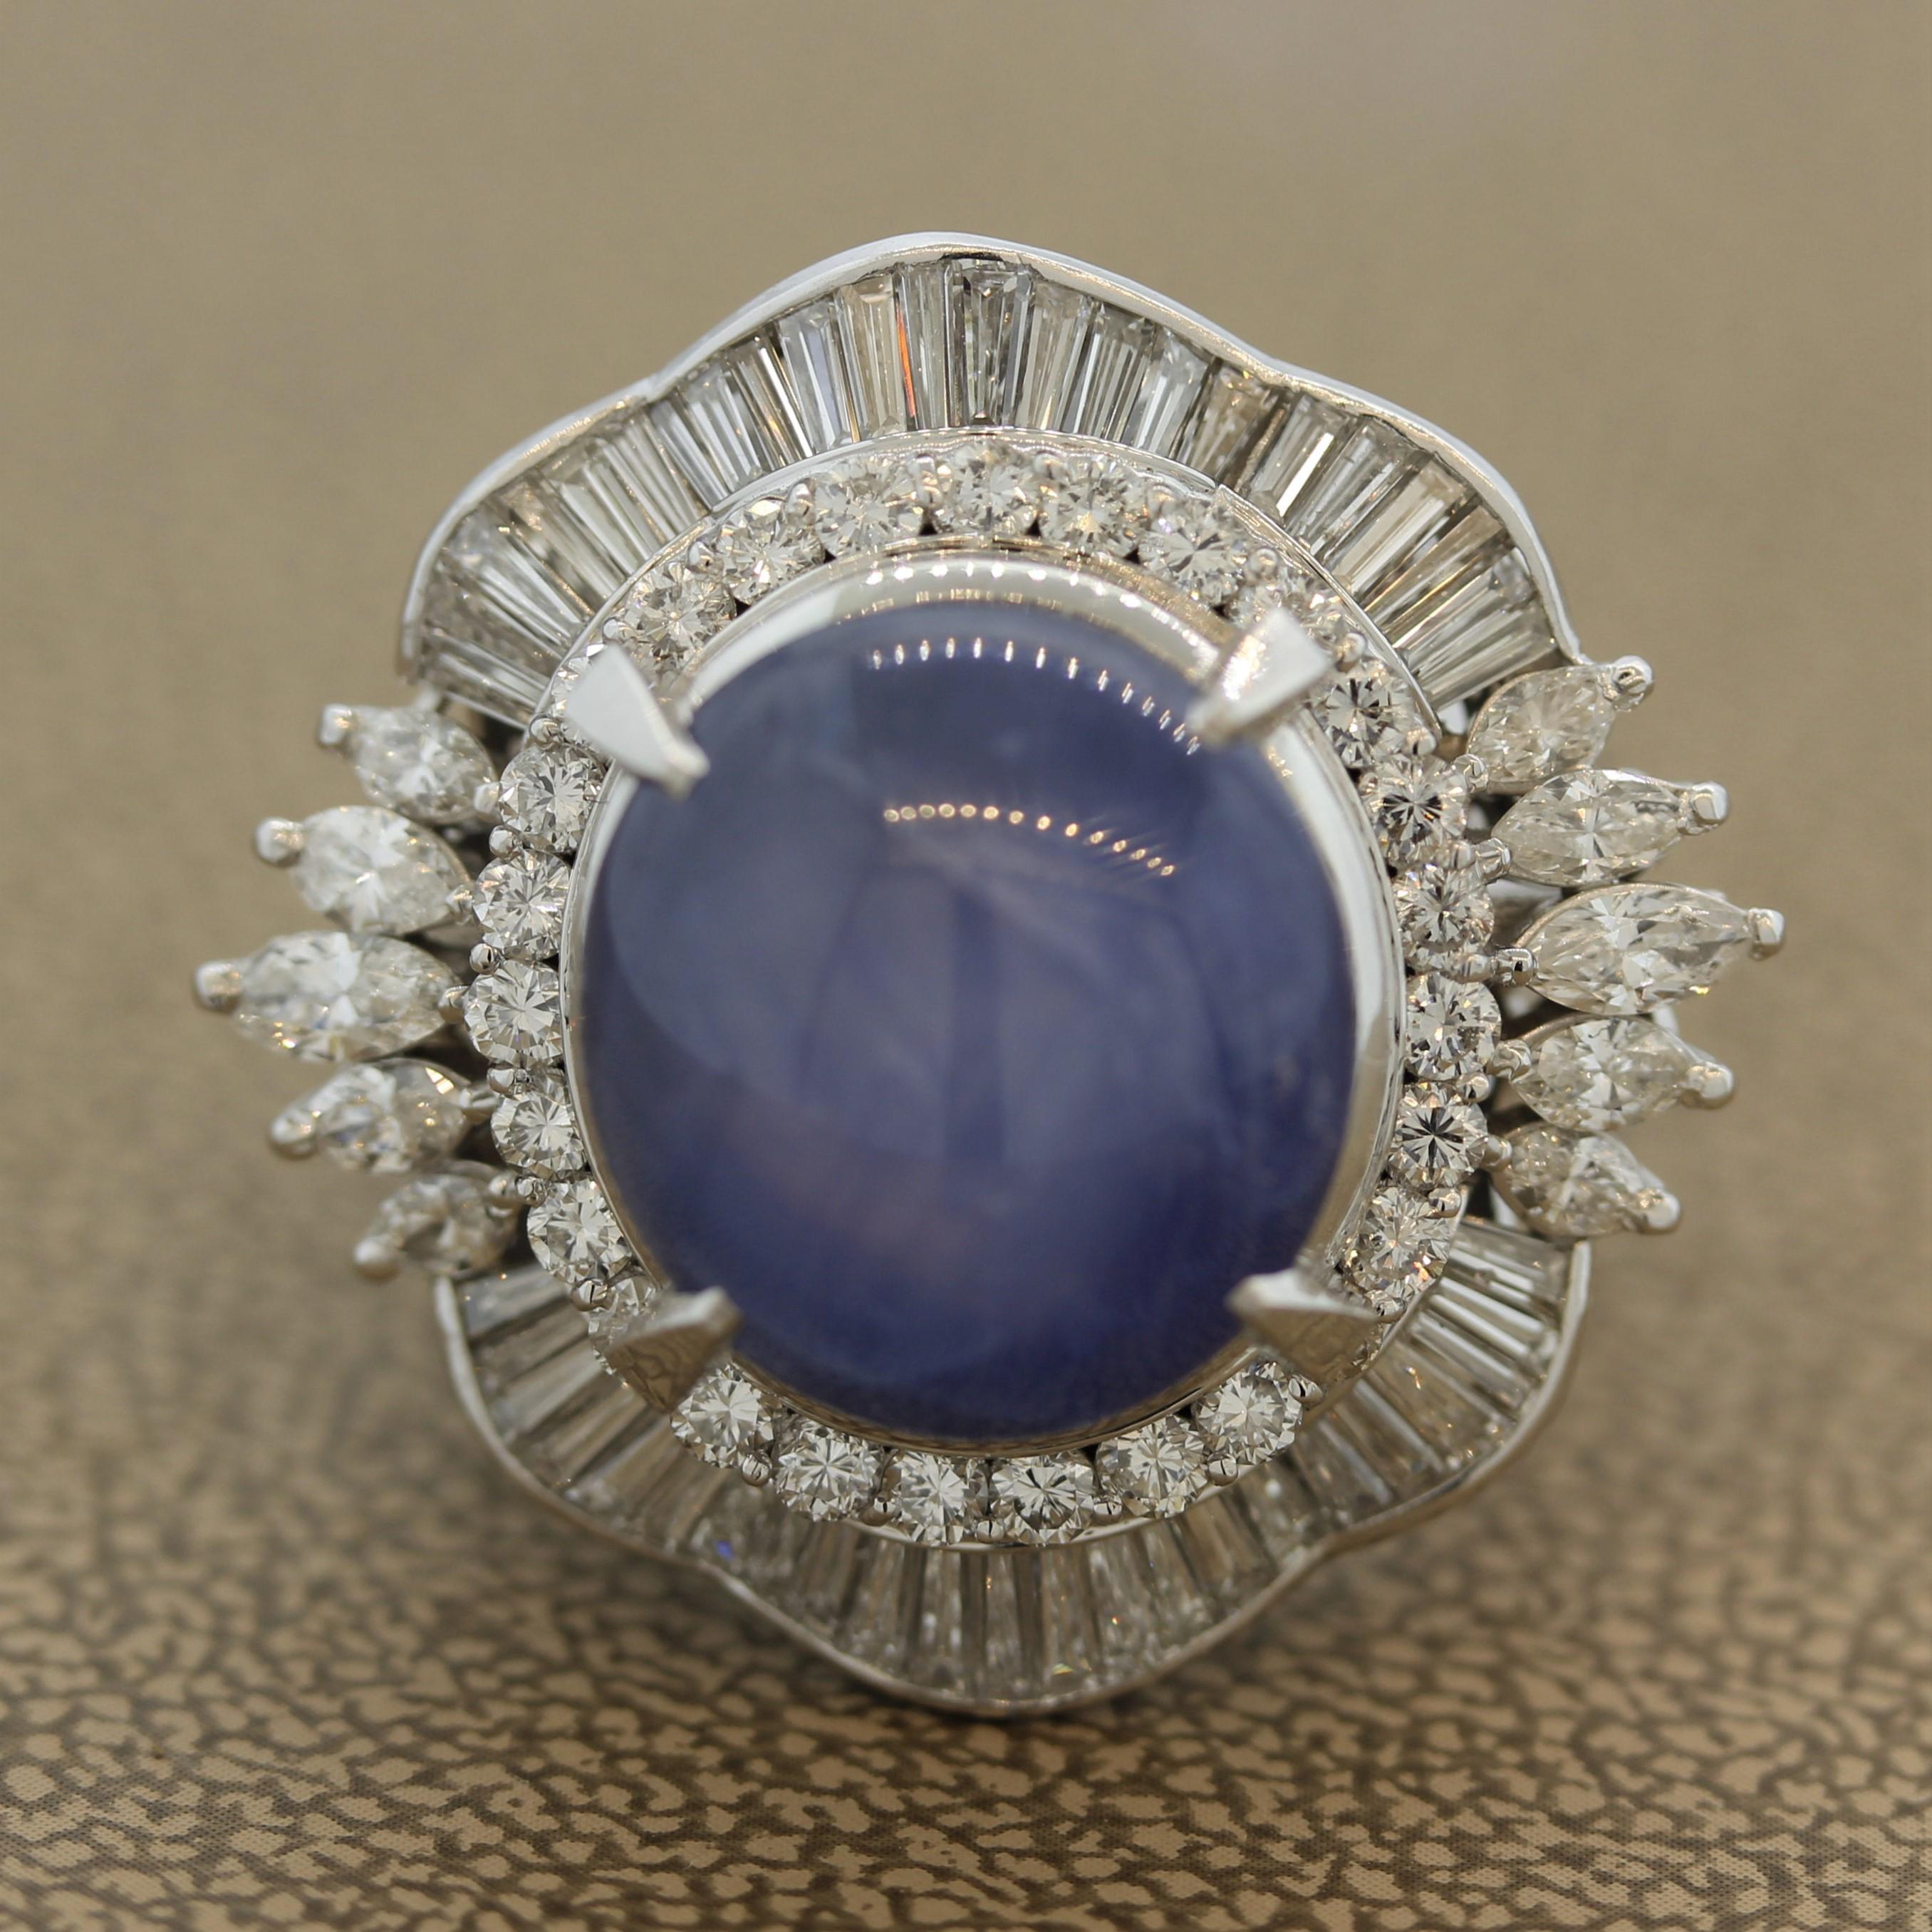 A superb diamond setting housing a 16.55 carat natural star sapphire. A blue star sapphire has a very strong 6-ray star which is best seen when a light it’s the surface of the stone. It is also centered perfectly on the sapphire and ear ray of the